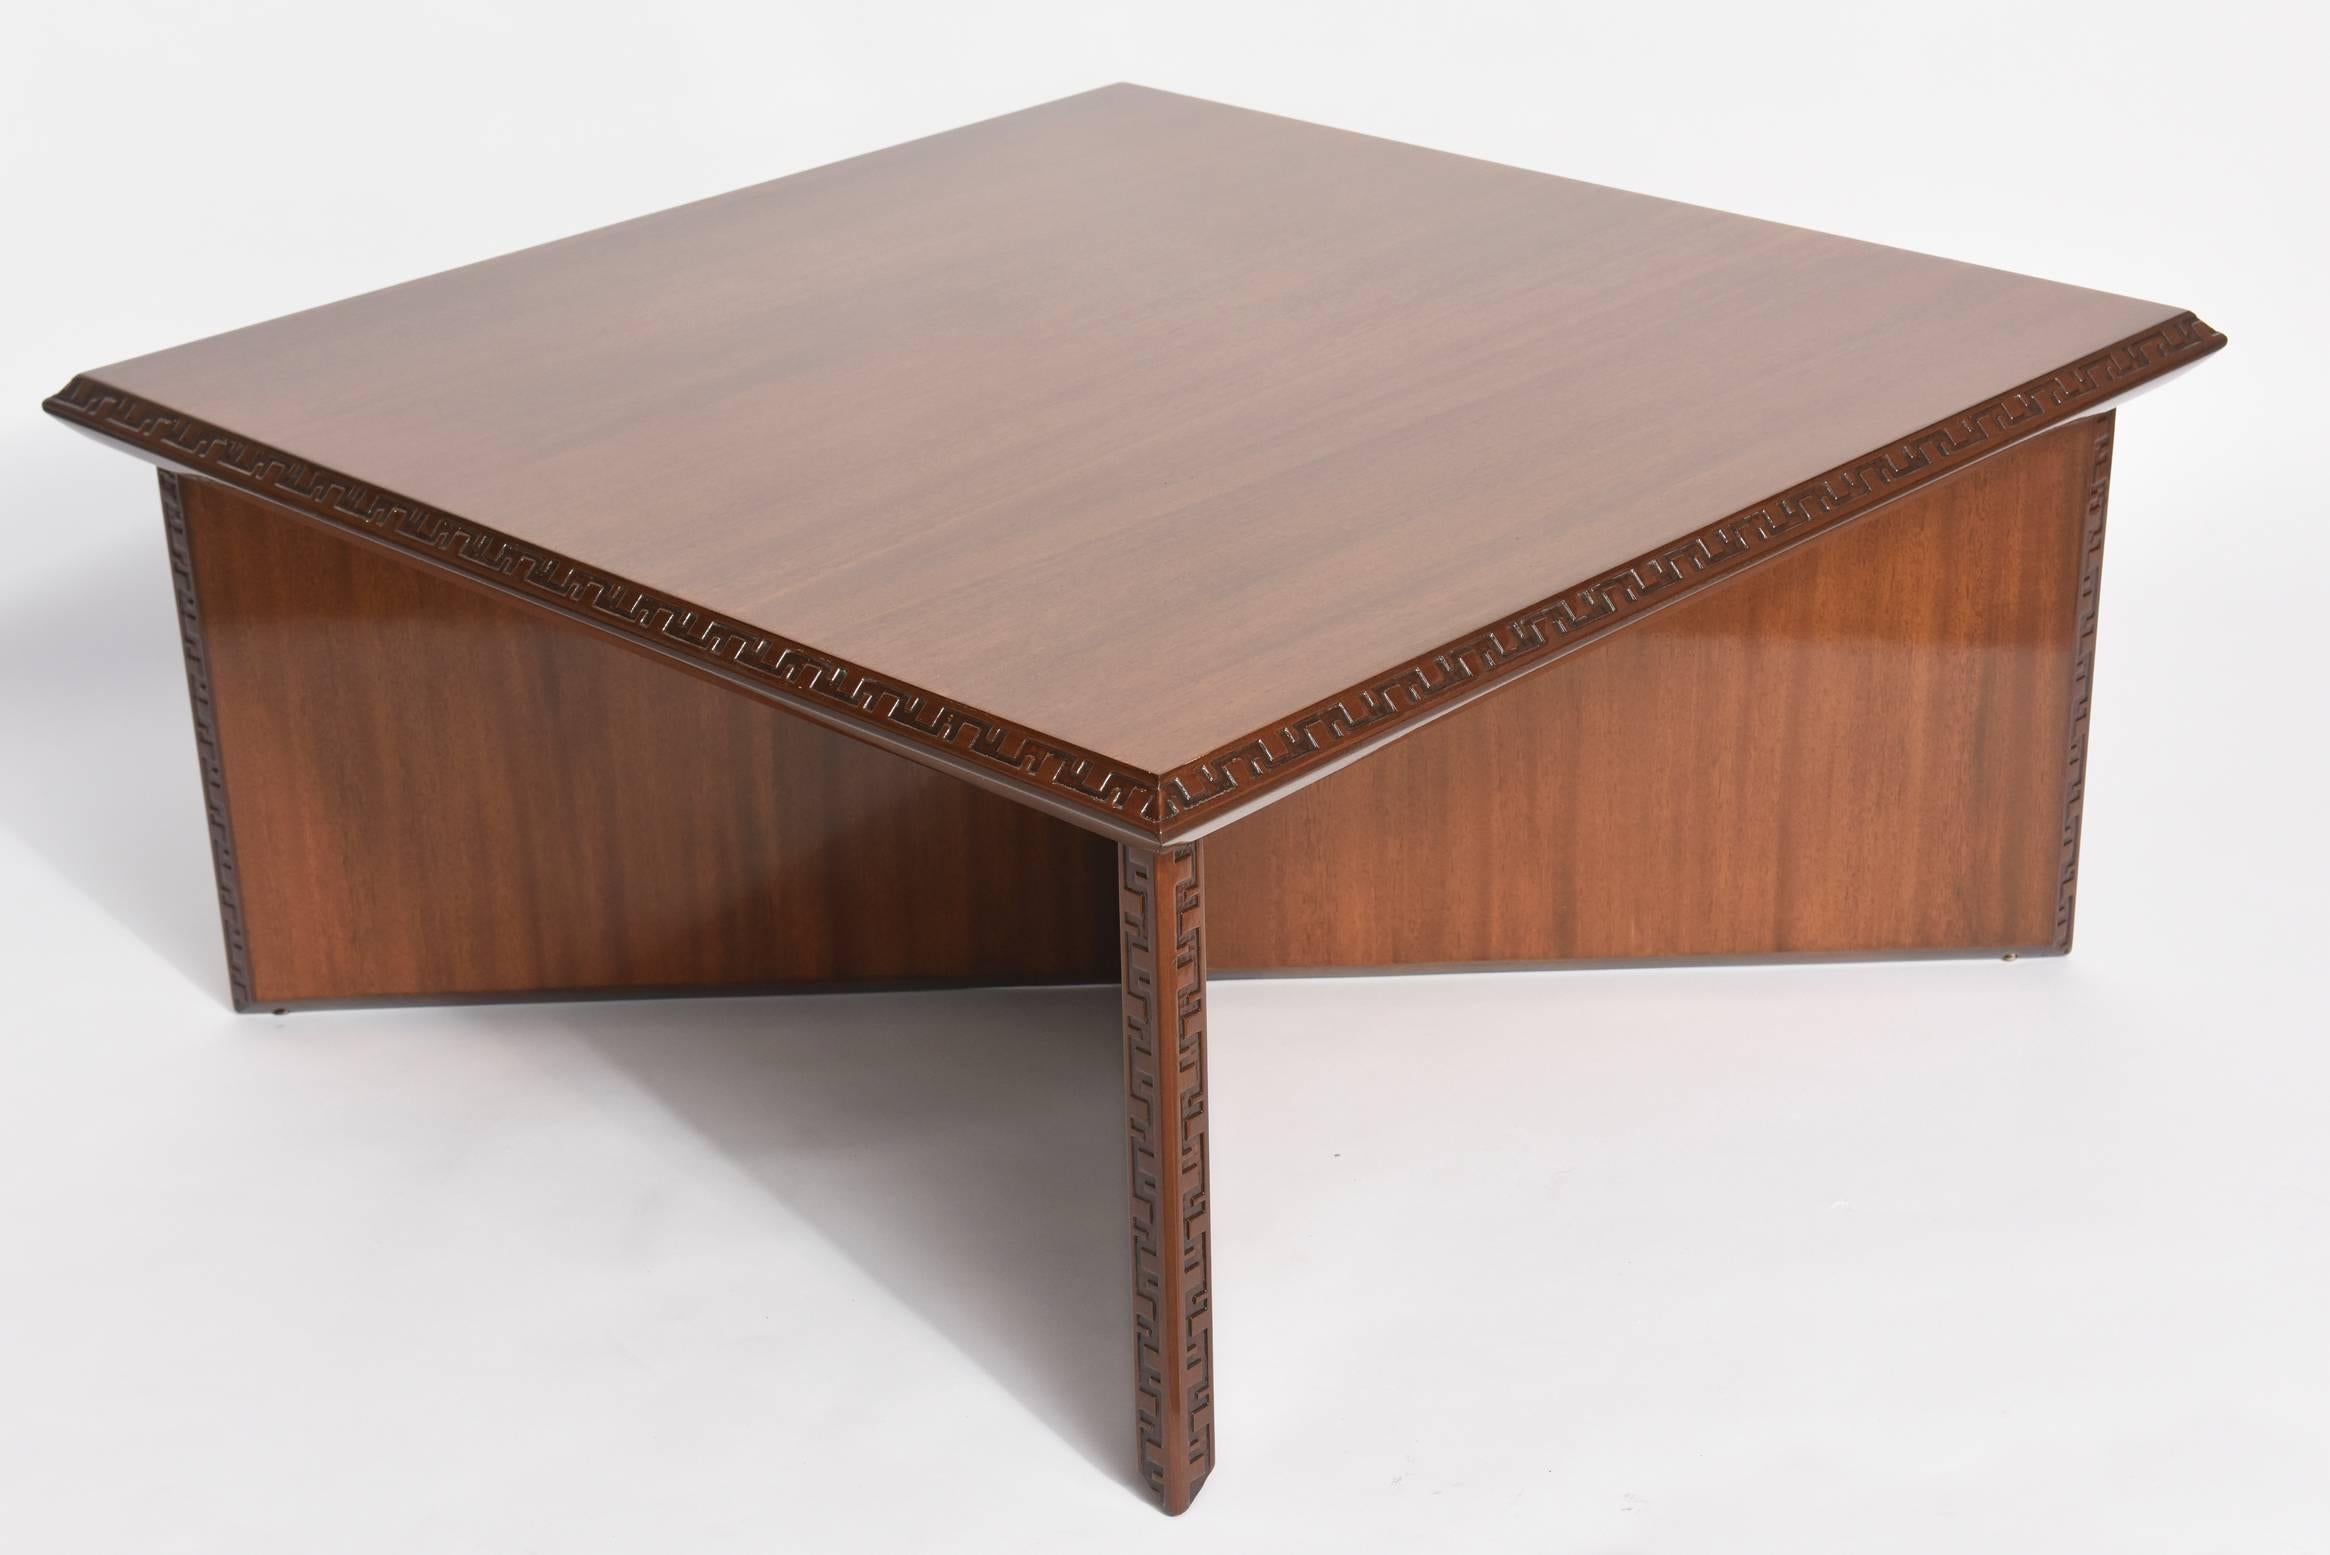 The square top with Greek key motif on edges above an "x" form base
heritage Henredon for Frank Lloyd Wright.